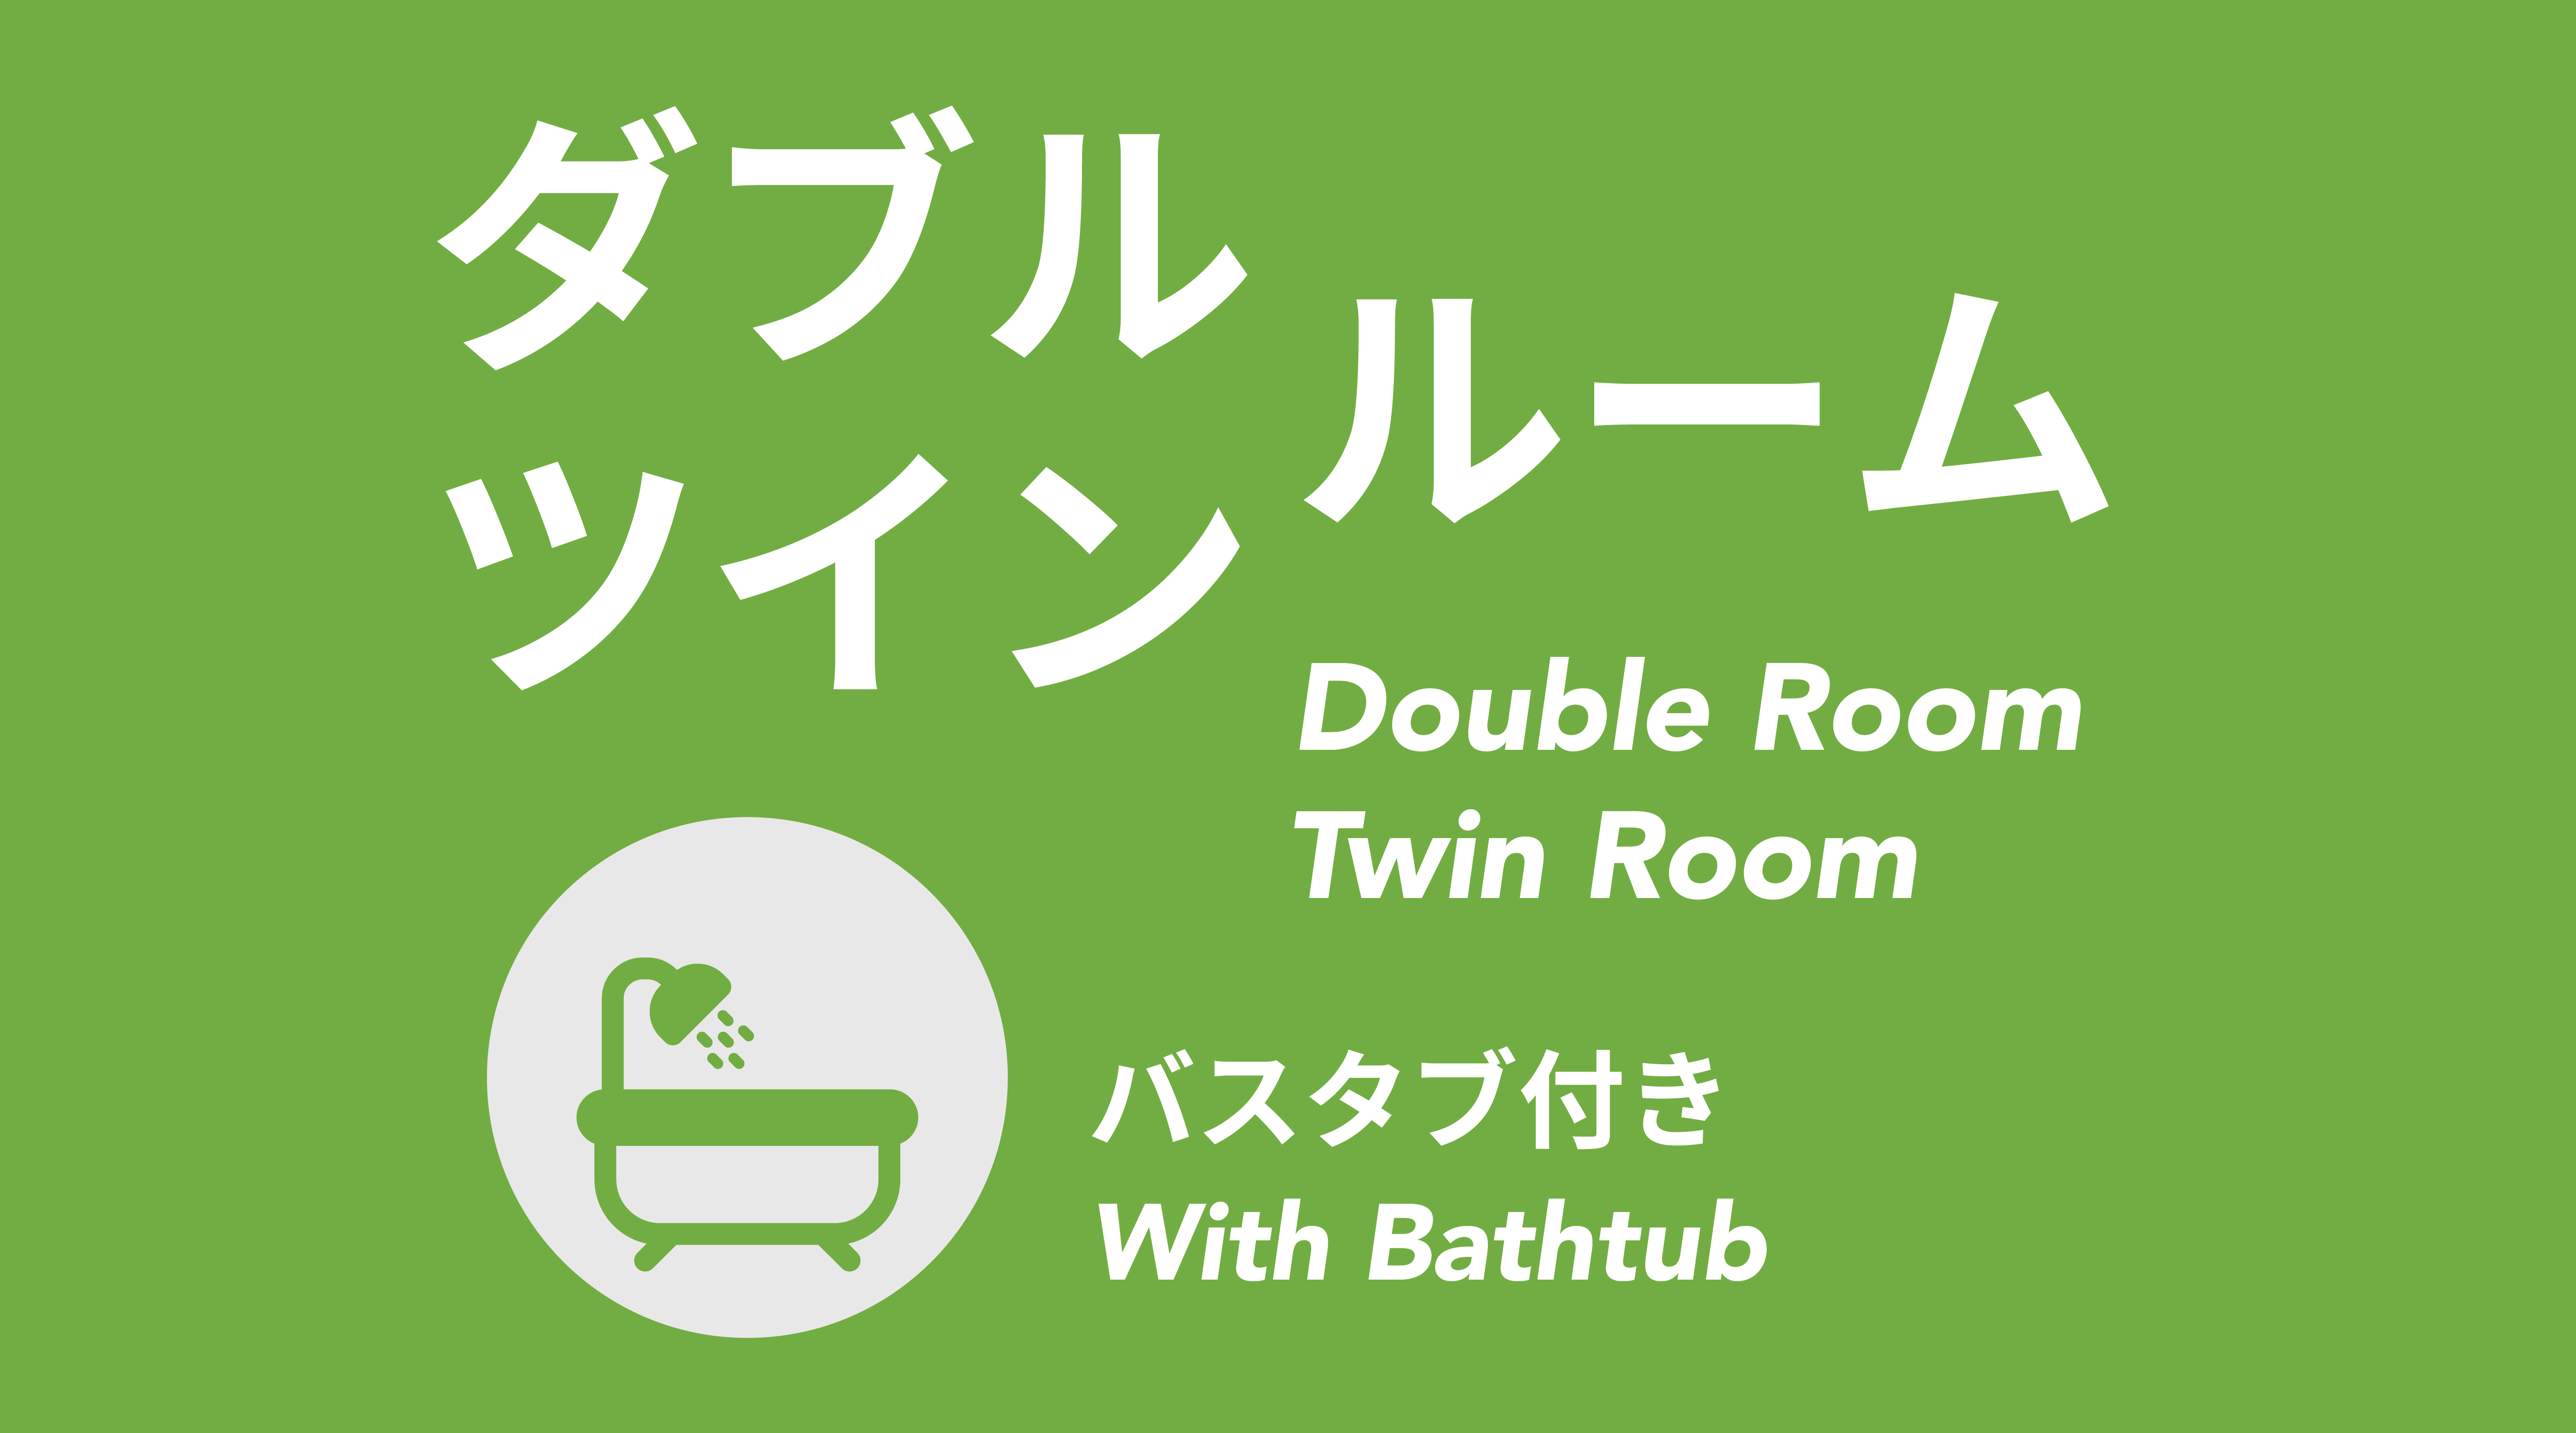 Double and Twin Room with Bathtub